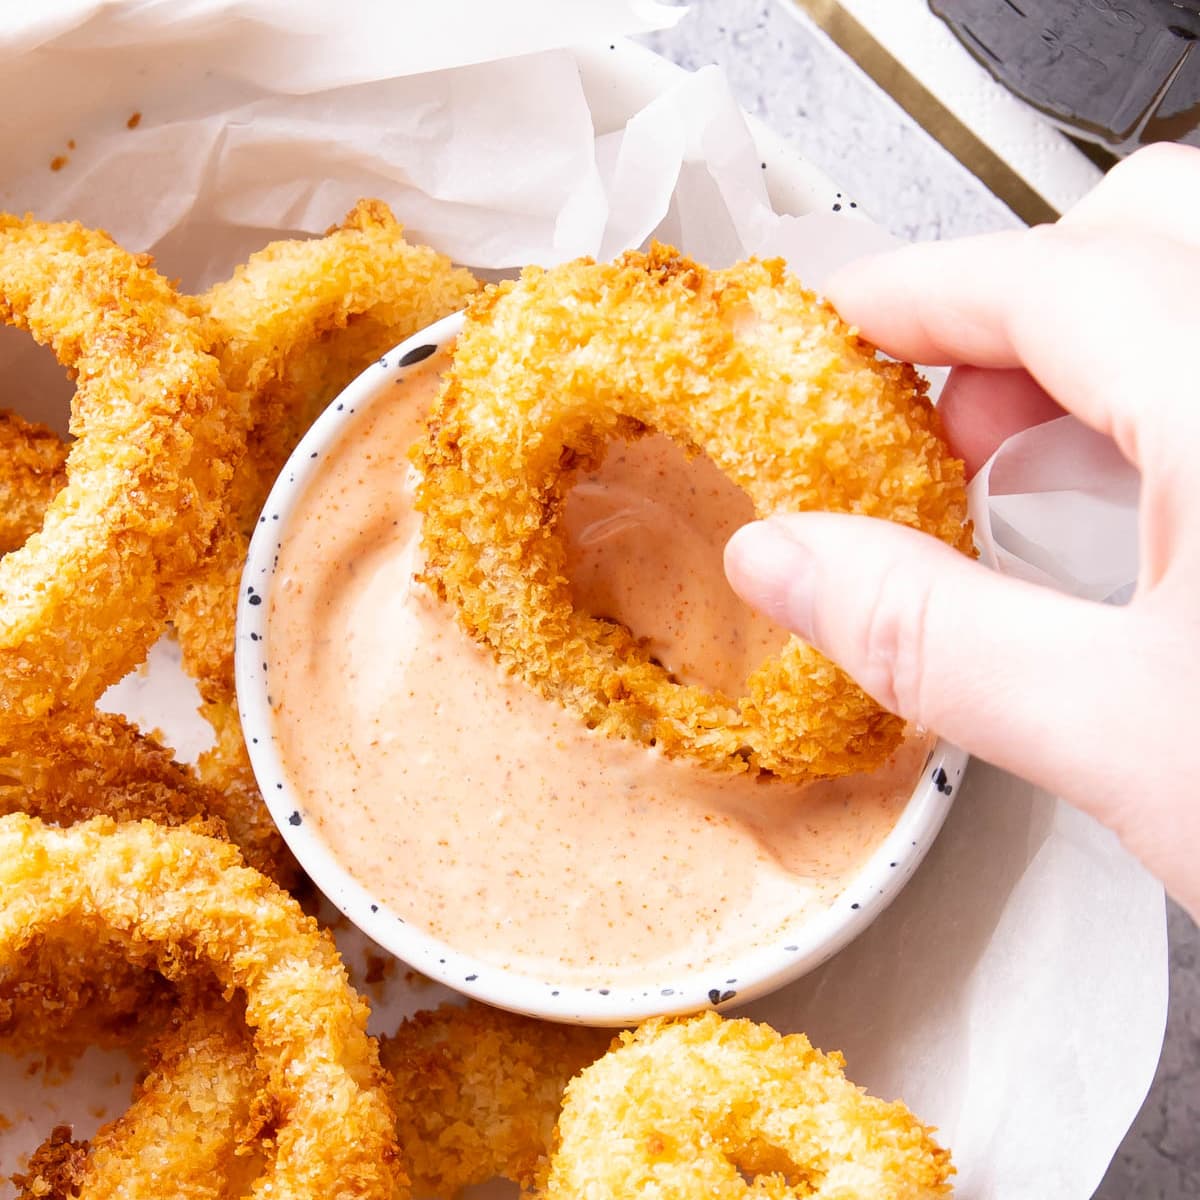 Hand dipping an onion ring into a bowl of onion ring sauce